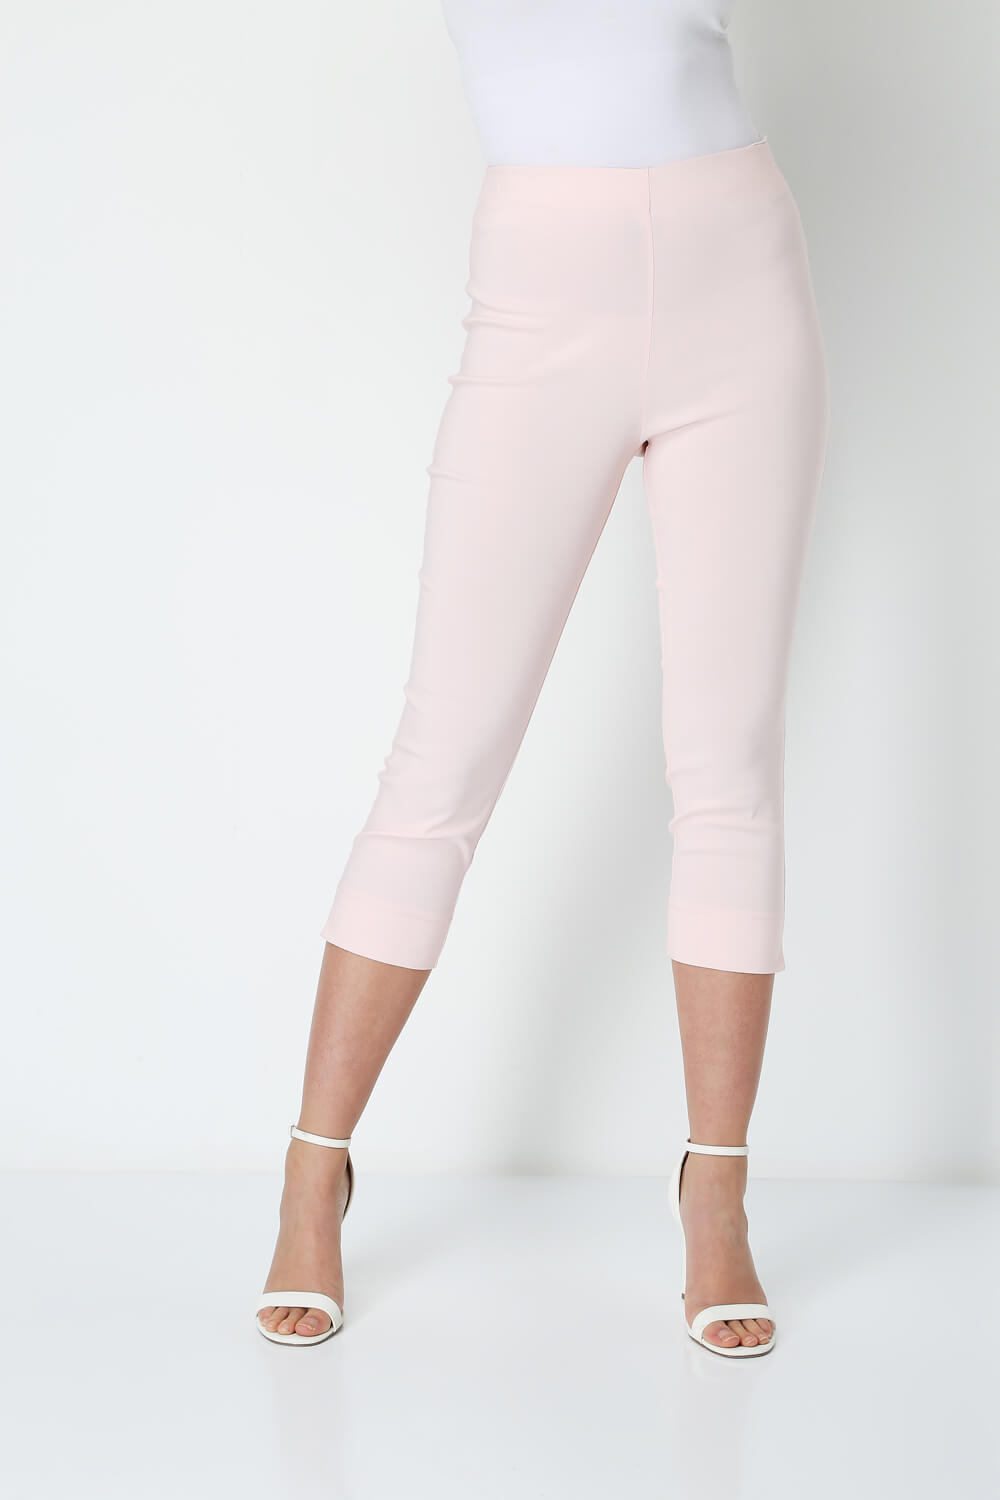 Light Pink Petite Cropped Stretch Trousers, Image 1 of 5